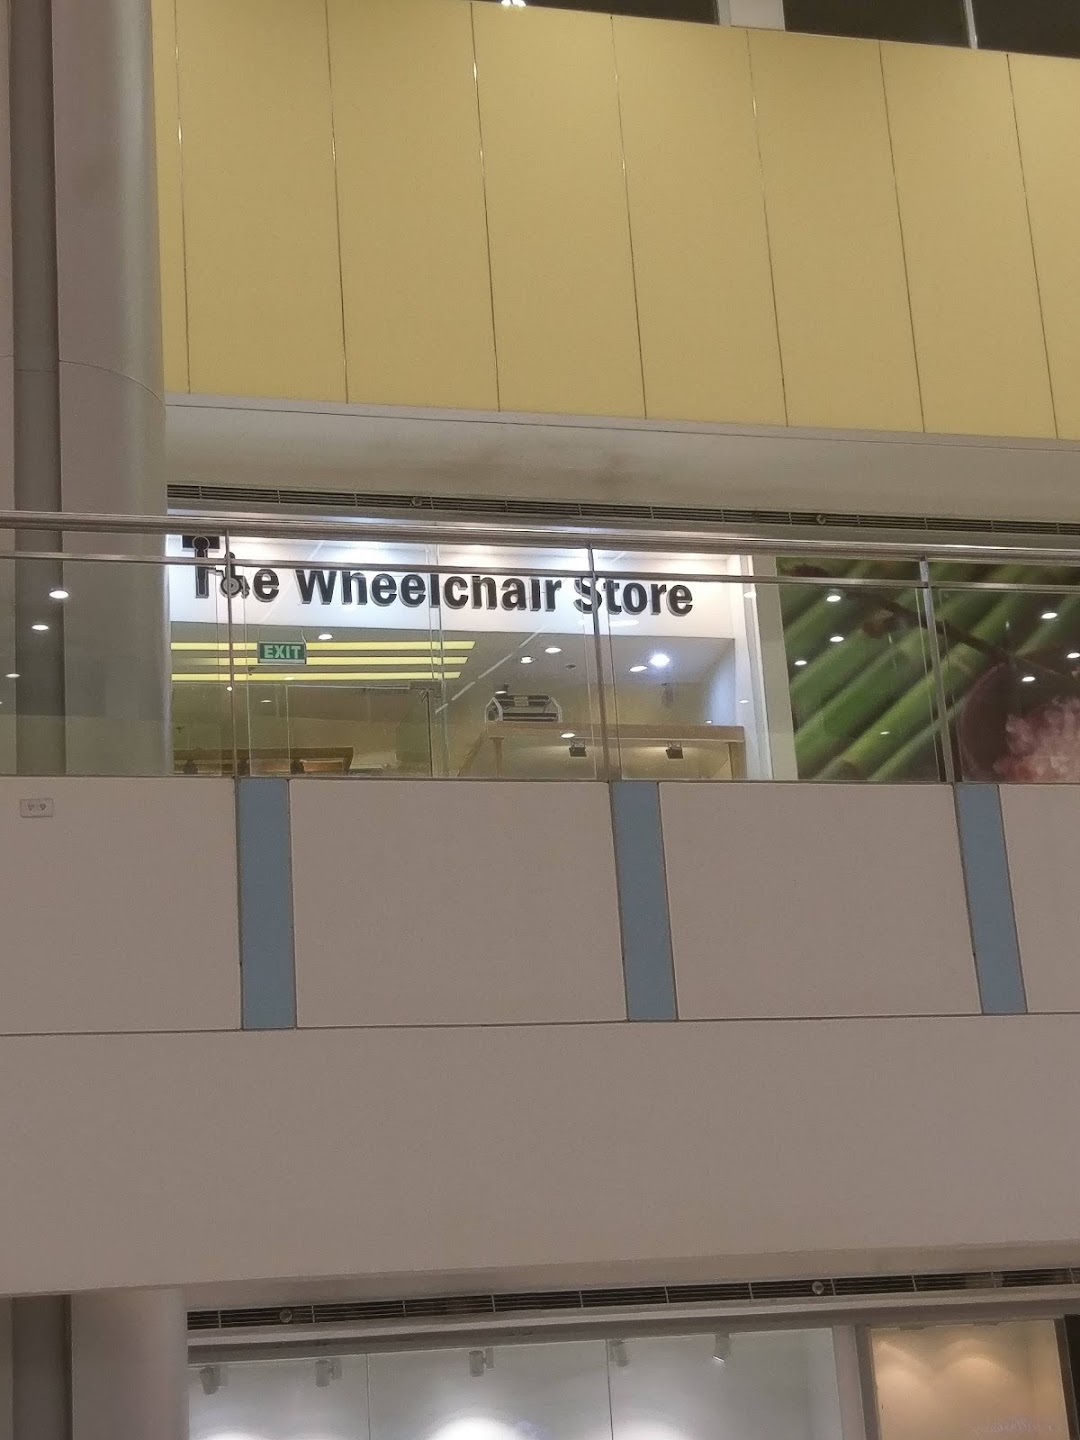 The Wheelchair Store